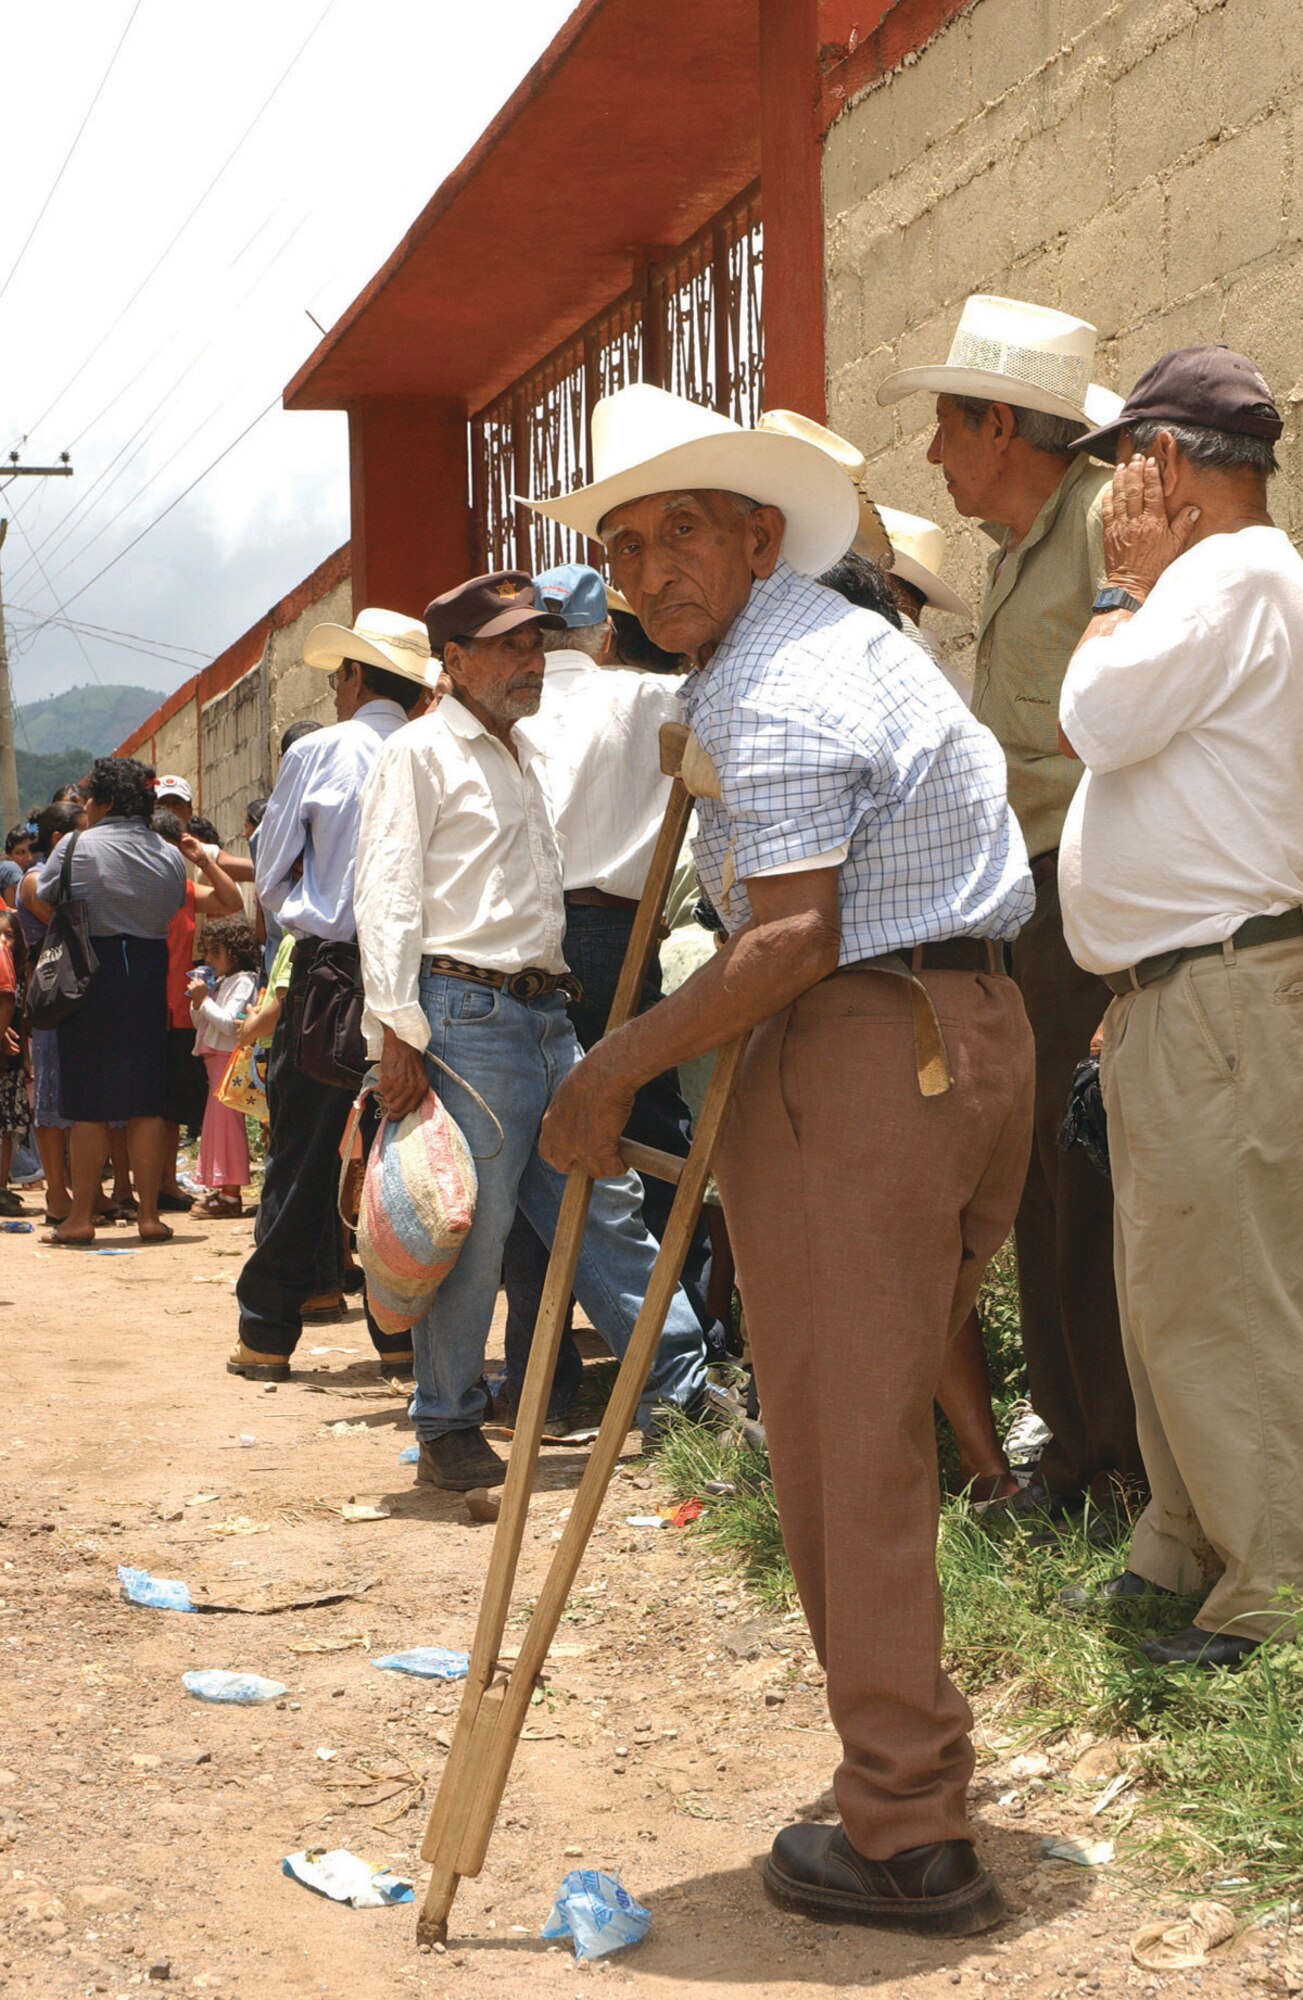 A line of Guatemalan citizens waits outside a school near Santa Rosa to be seen by members of the 163d Medical Group. Thirty-one members of the group traveled to Guatemala Aug. 16-30 to participate in a U.S. Air Forces South-sponsored Medical Readiness Training Exercise where they provided medical care for more than 5,700 people in three of the poorest communities in Santa Rosa. (U.S. Air Force photo by Capt Al Bosco, 163RW/PA)